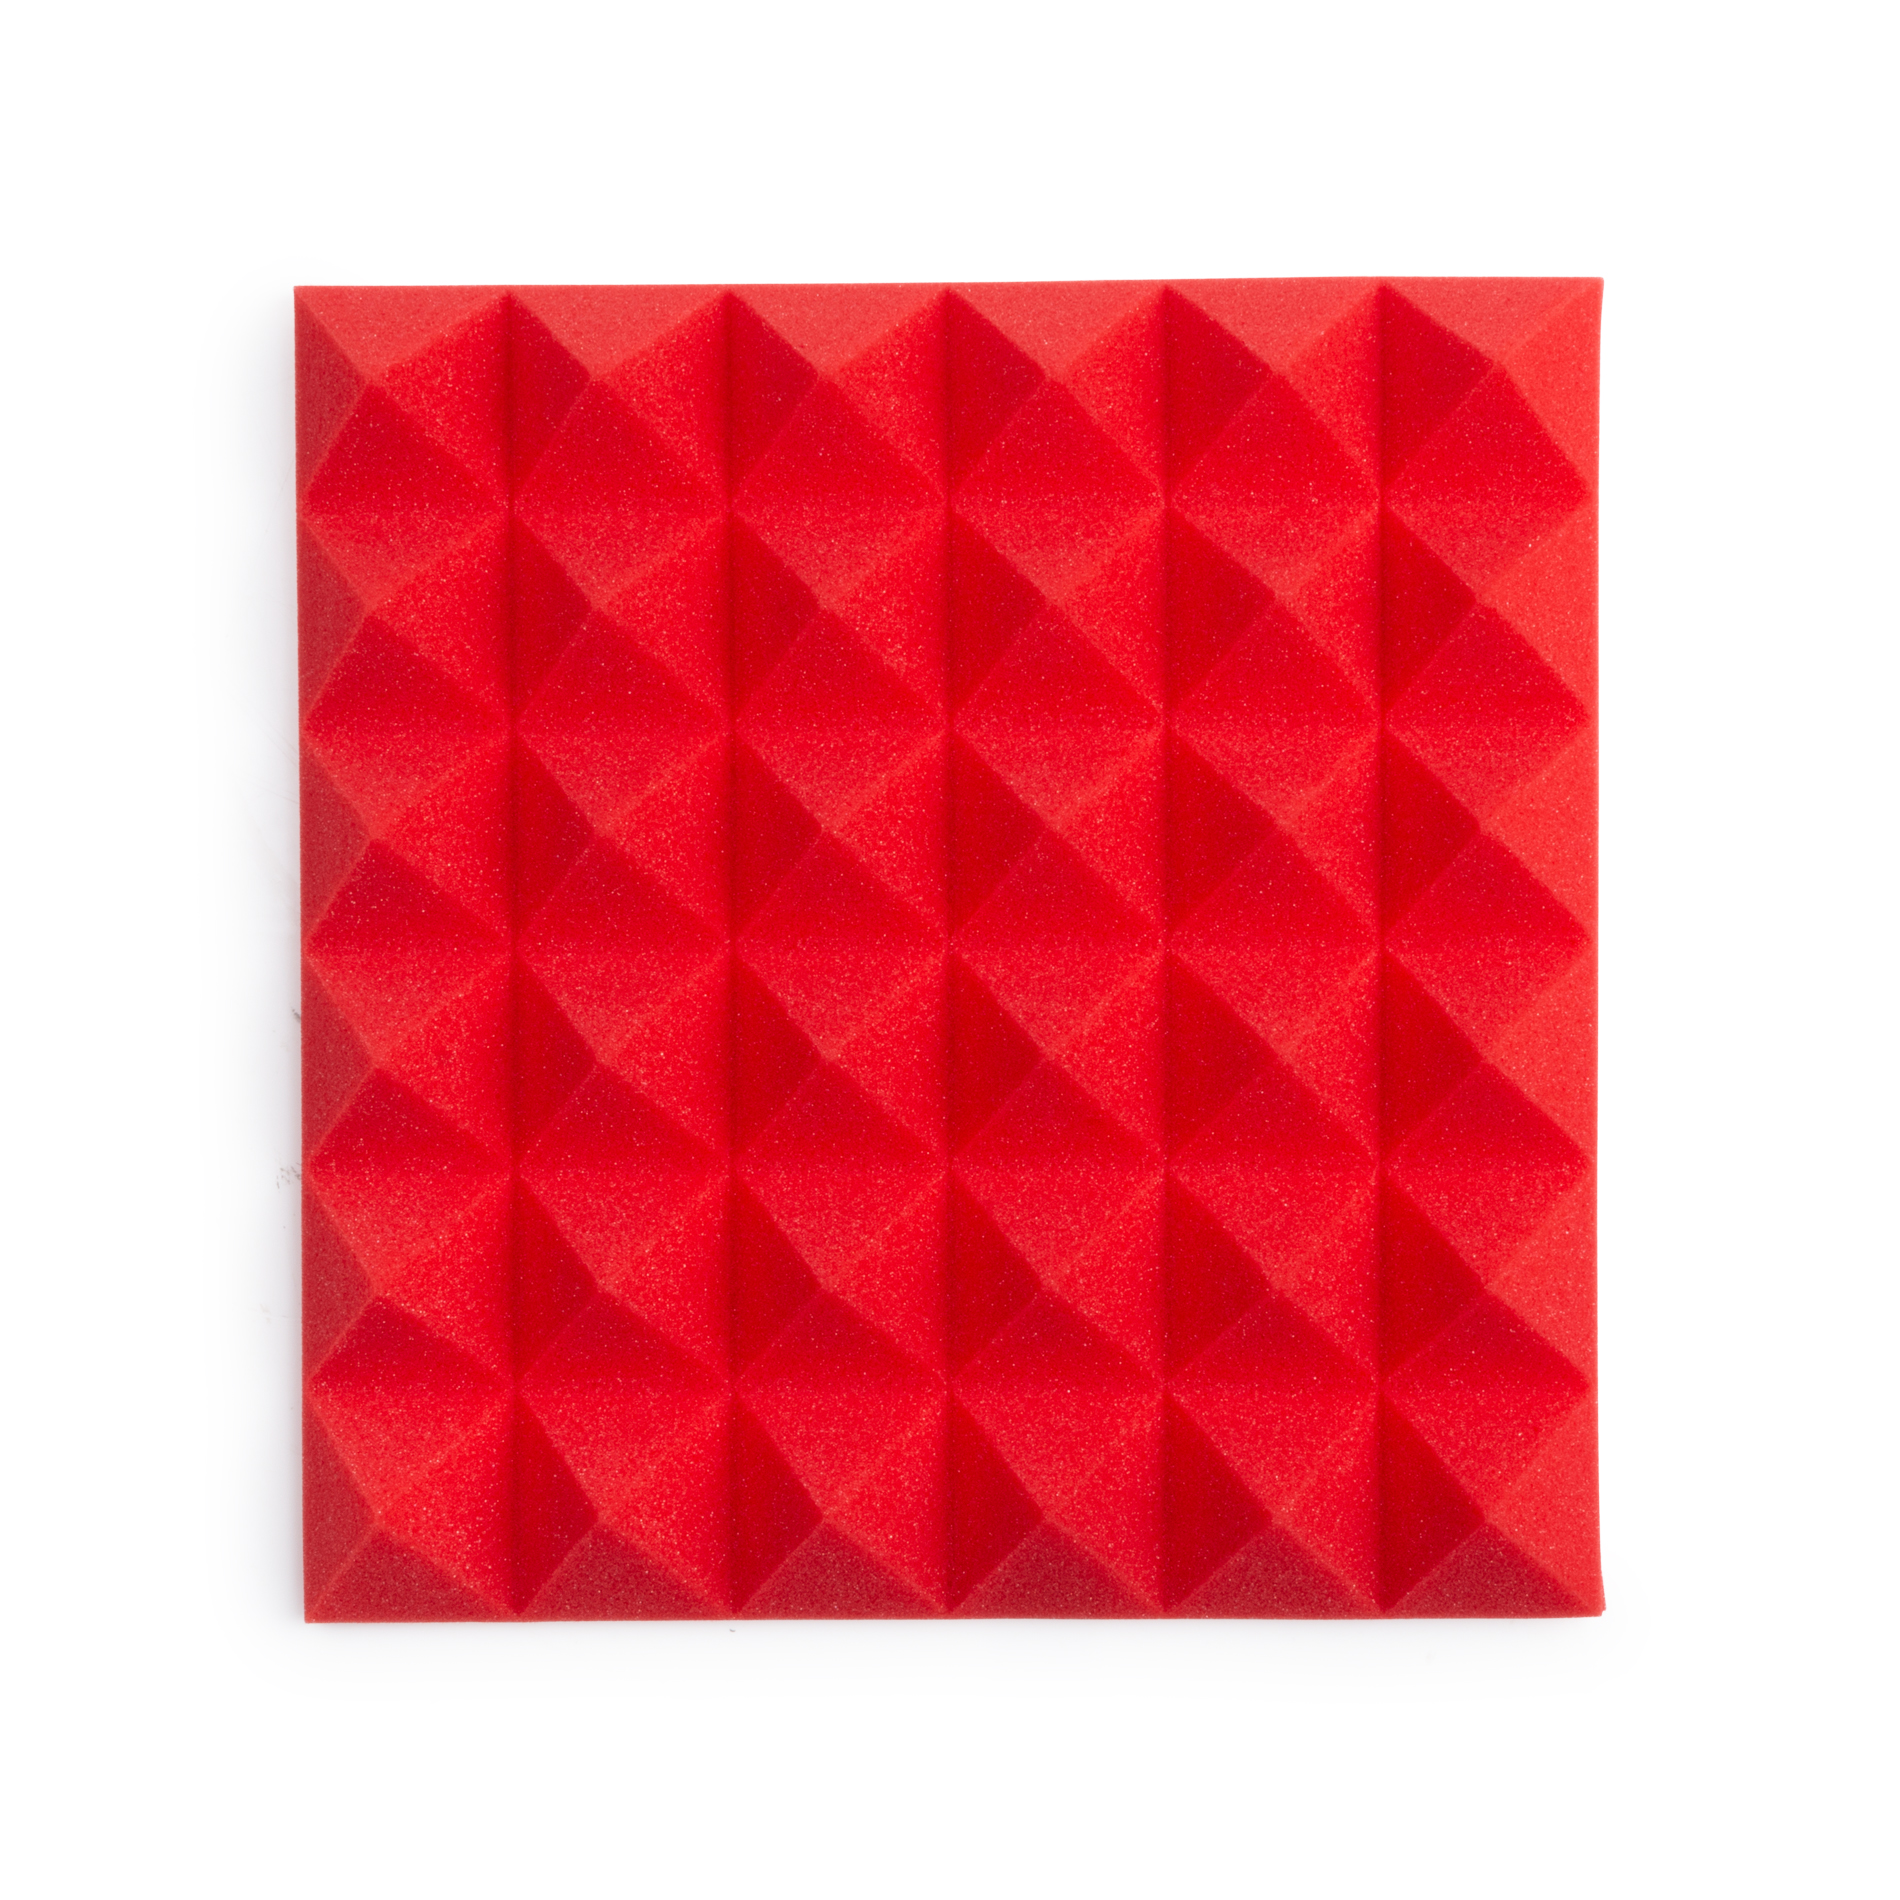 2 Pack of Red 12×12″ Acoustic Pyramid Panel-GFW-ACPNL1212PRED-2PK